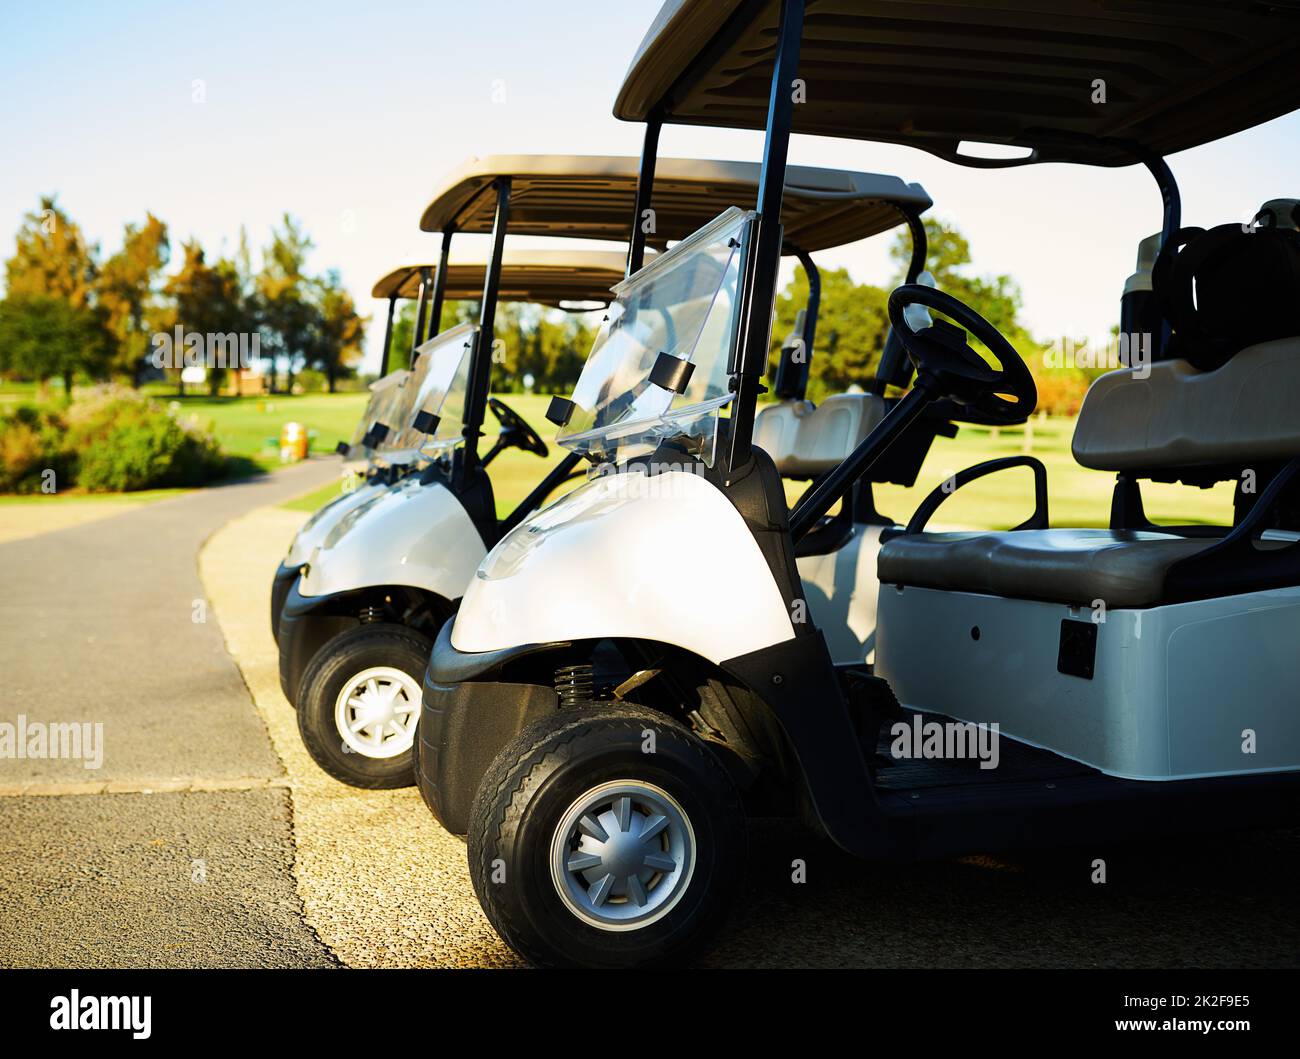 Its a good day for a game of golf. Shot of three golf carts standing side by side next to a golf course. Stock Photo